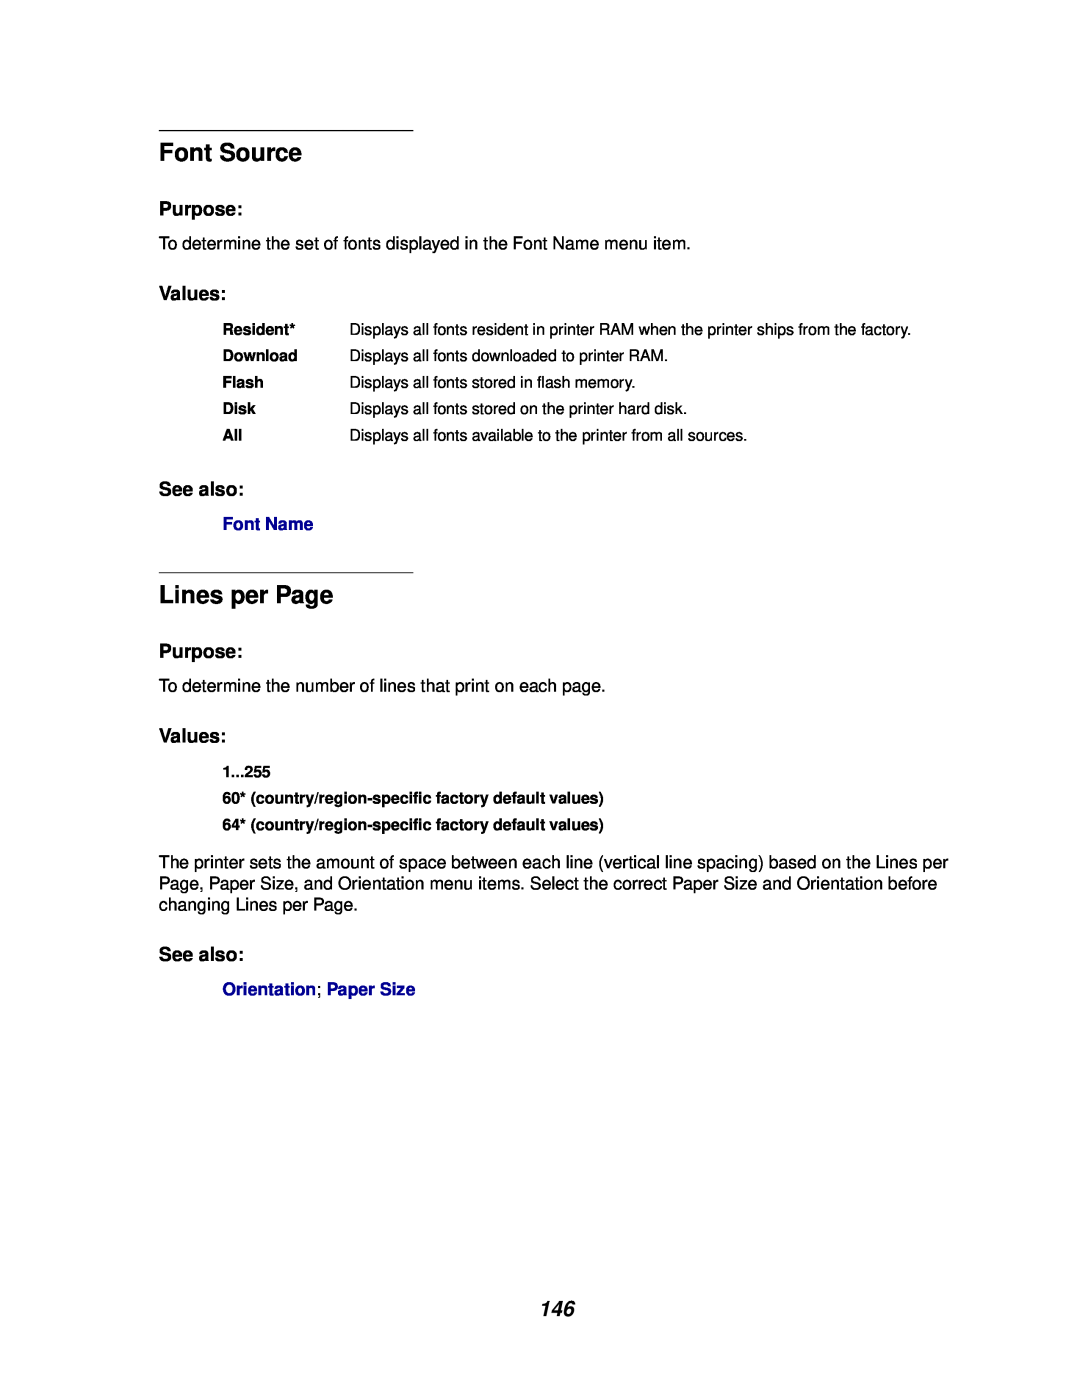 Lexmark 812 manual Font Source, Lines per Page, Purpose, Values, See also 